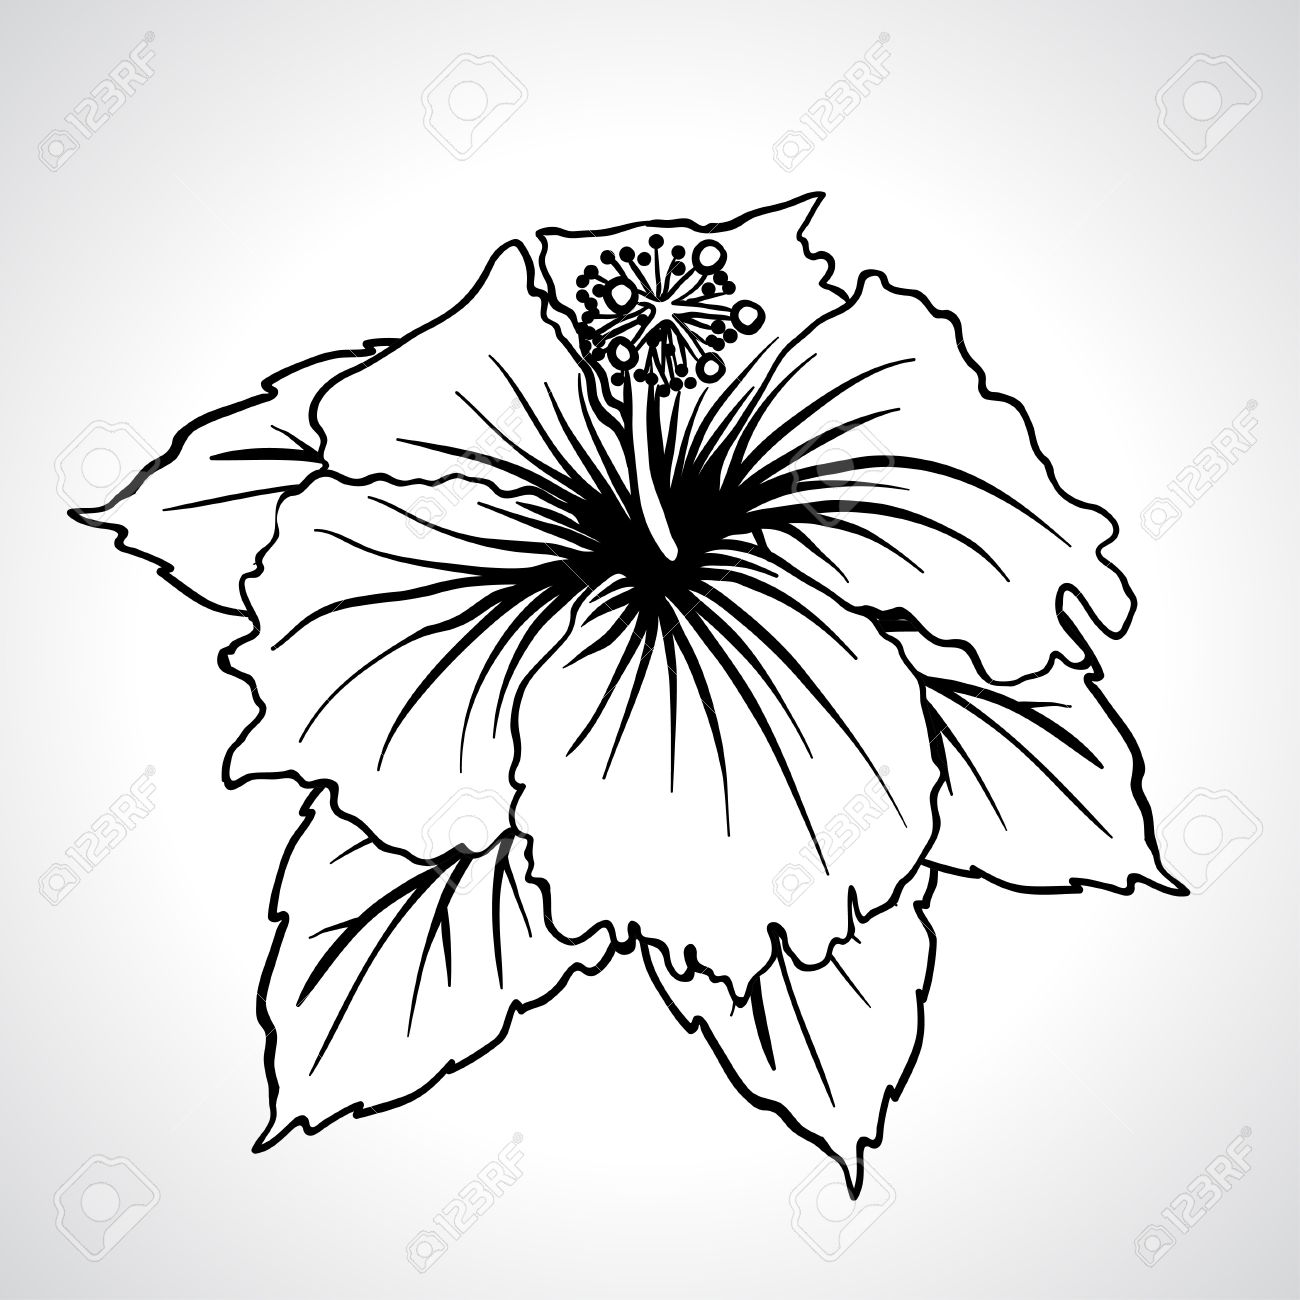 Chinese flower at getdrawings. China clipart drawing